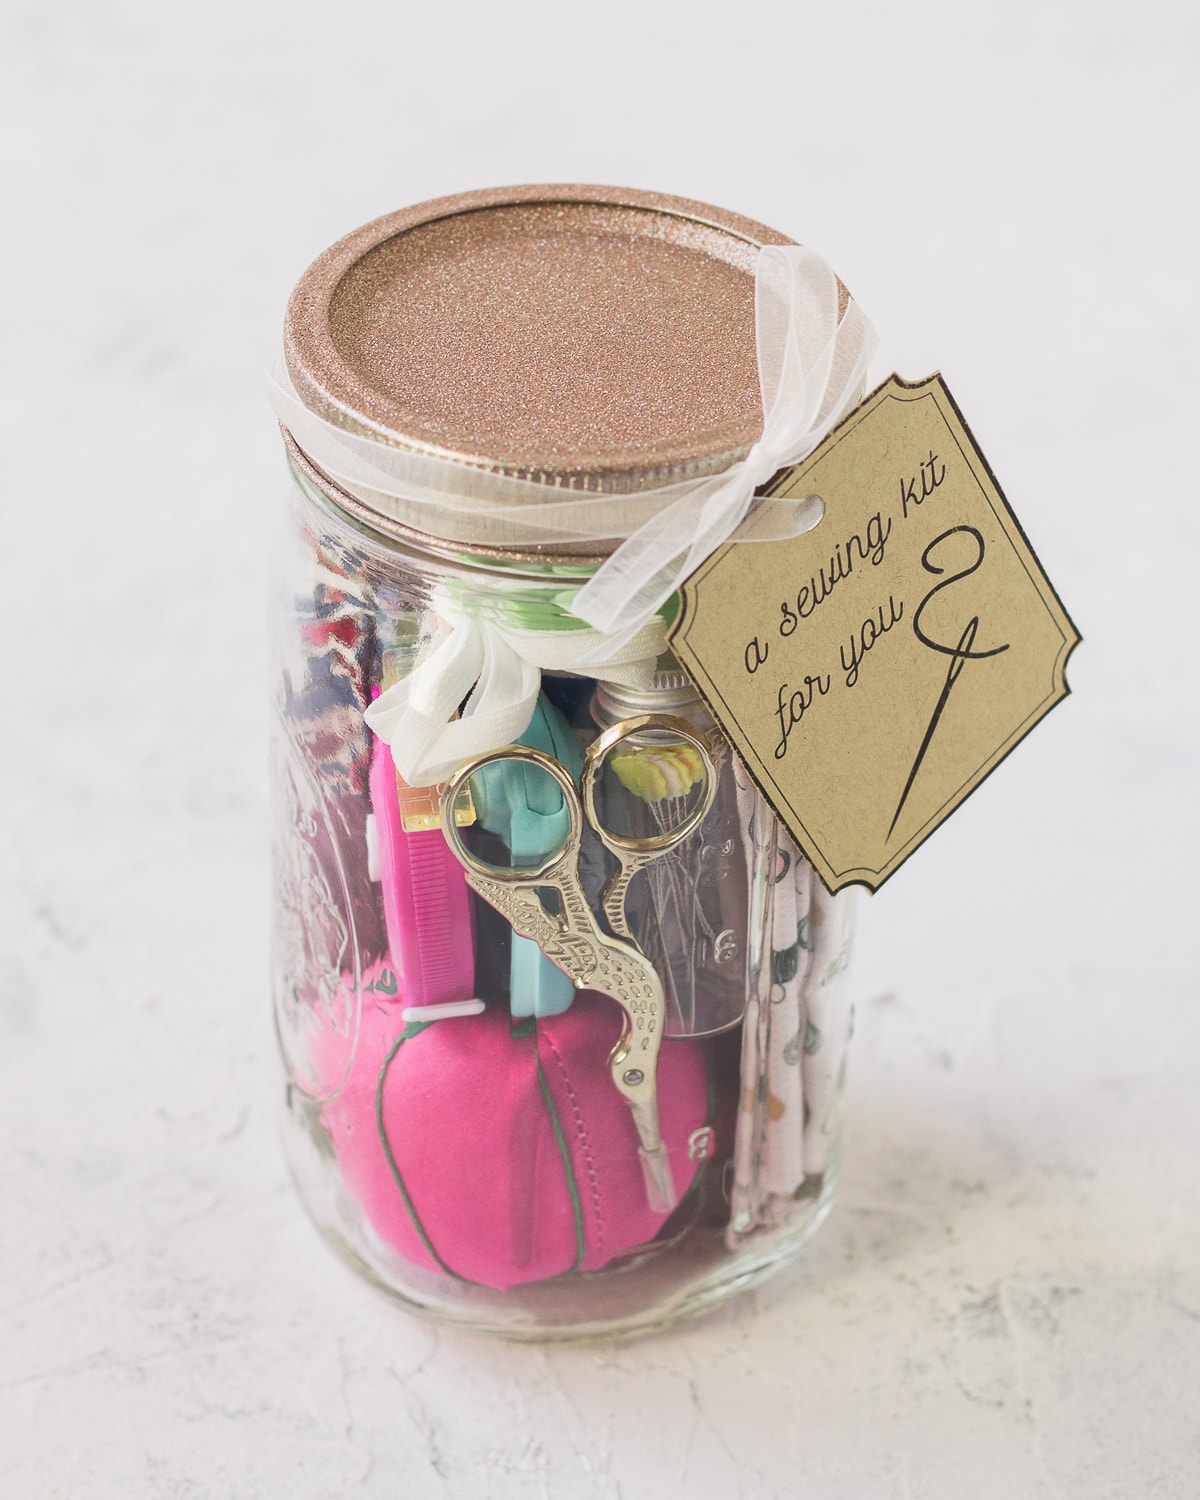 A mason jar sewing kit topped with a glittery lid.